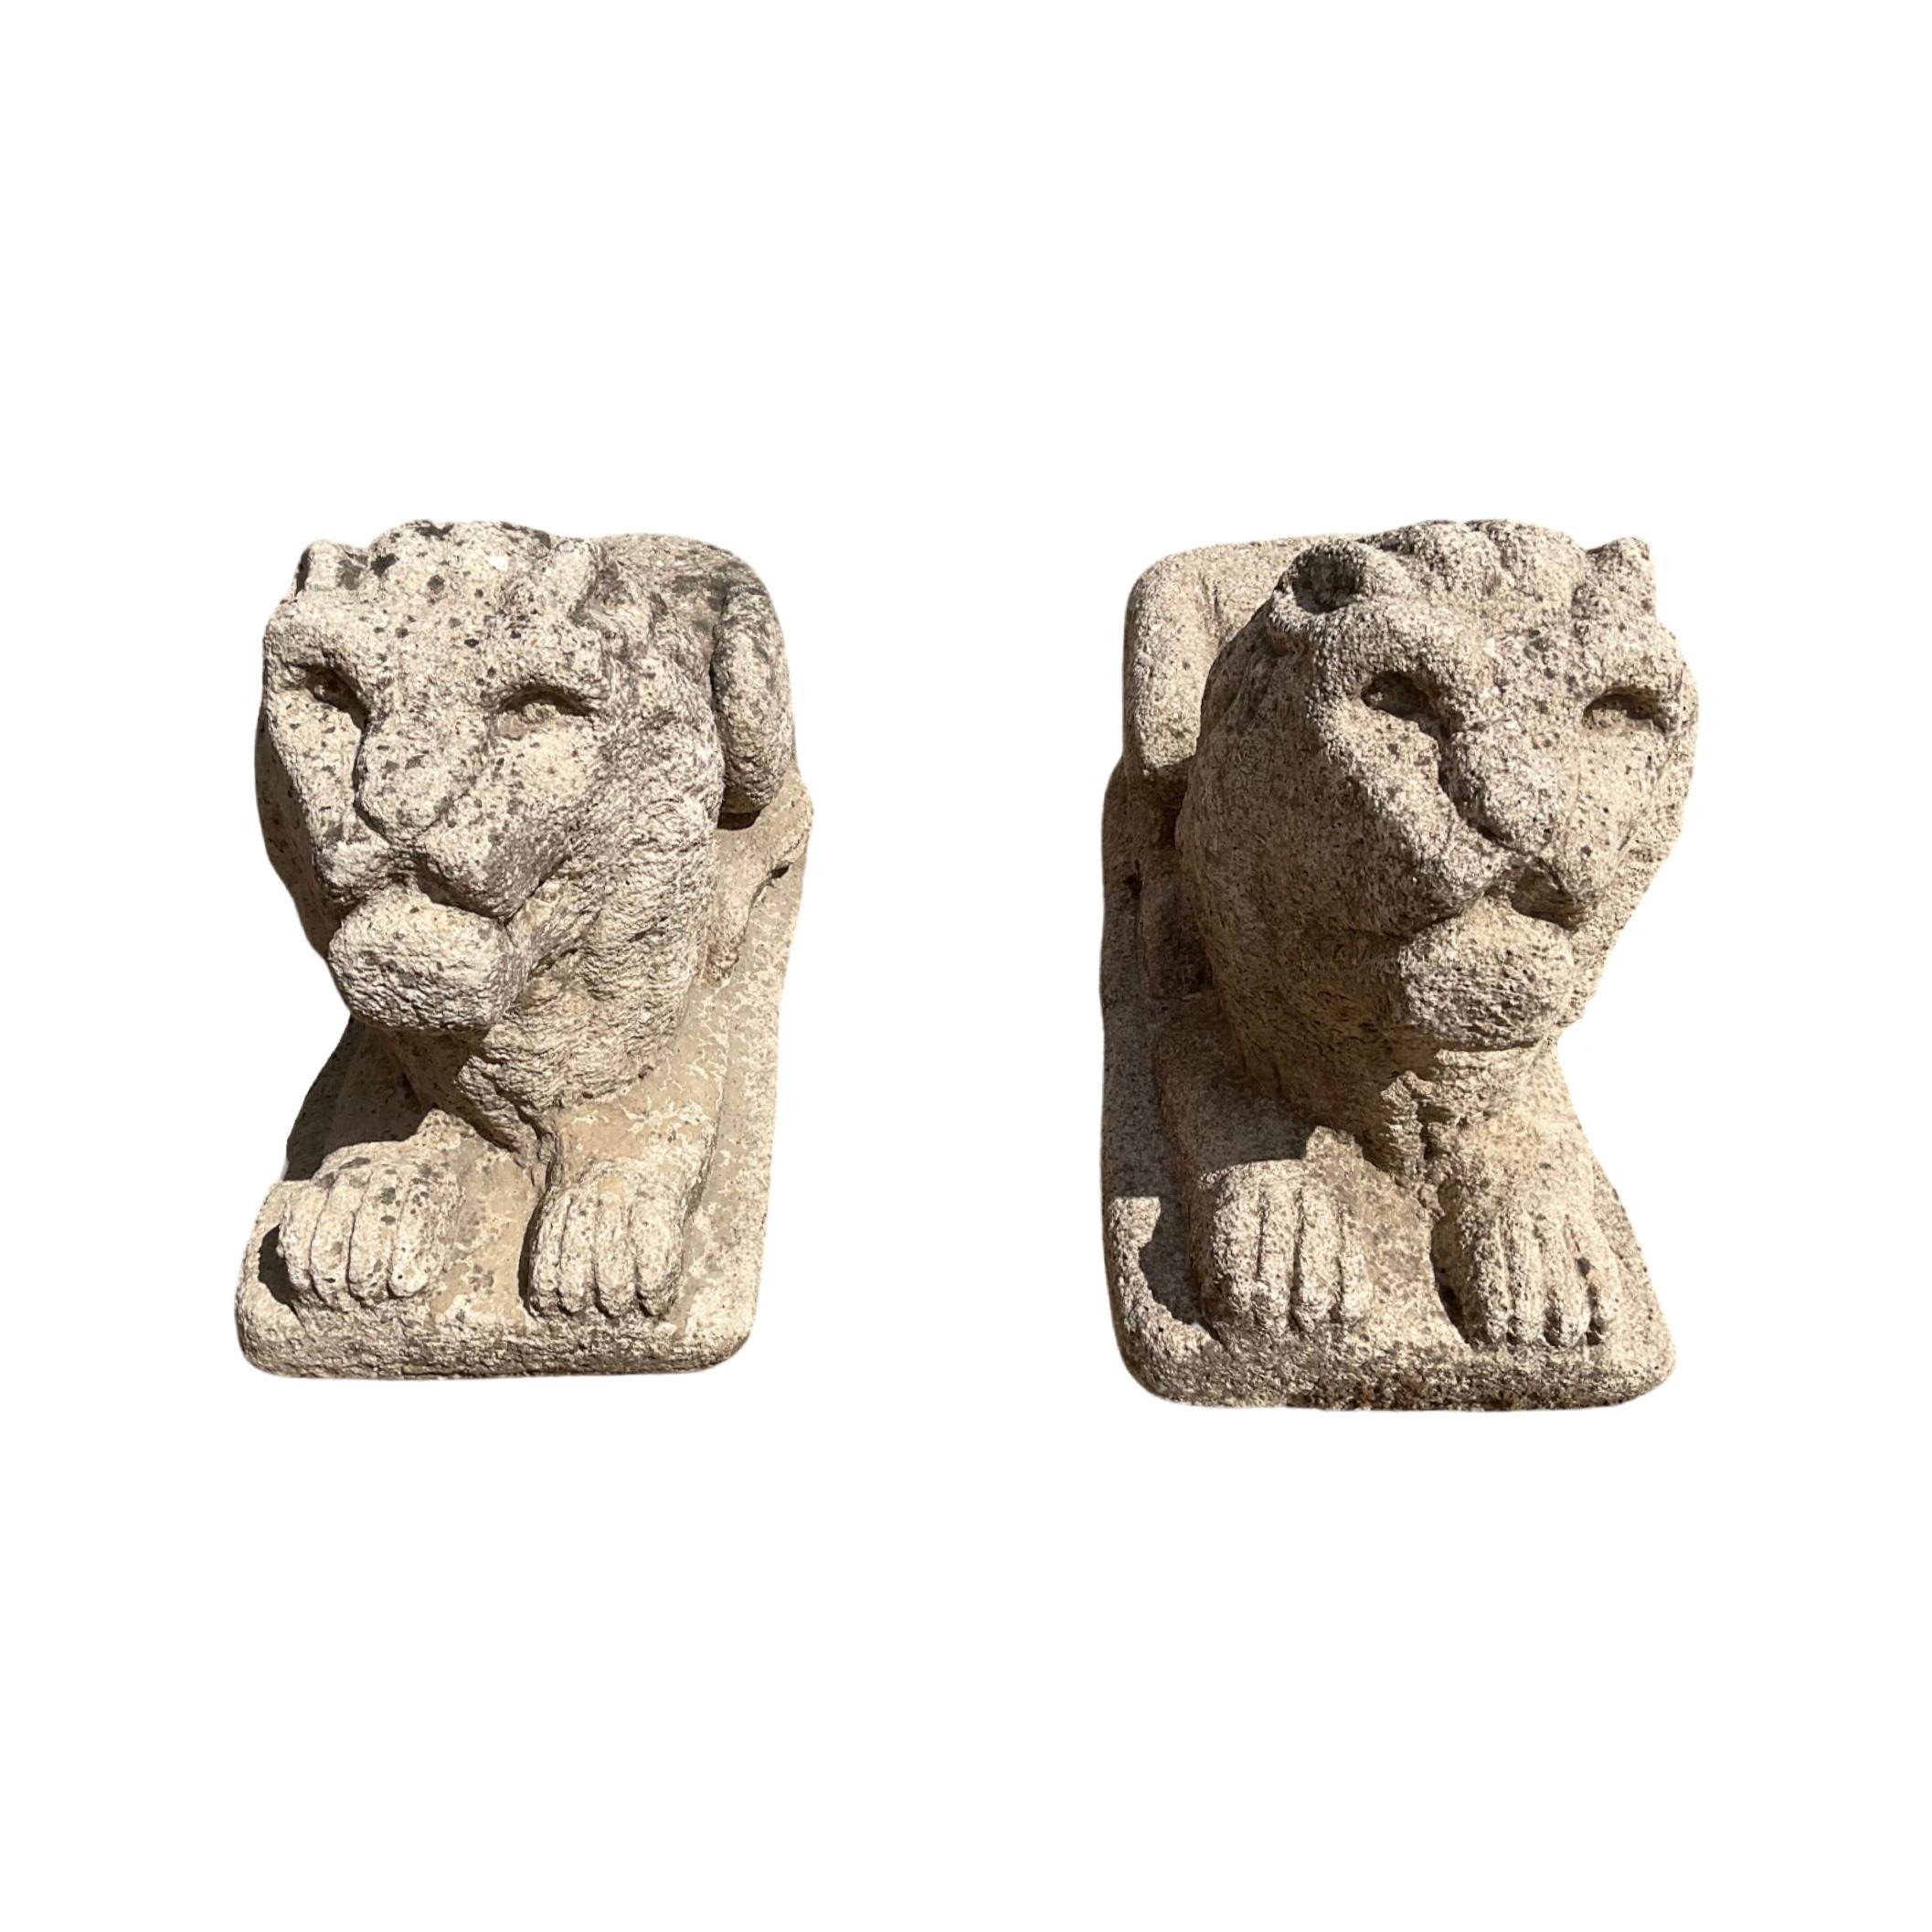 These 17th century French limestone lion sculptures are crafted from the highest grade natural limestone for unparalleled quality and durability. The intricate details, hand-carved patterns, and delicate curves make these sculptures a timeless